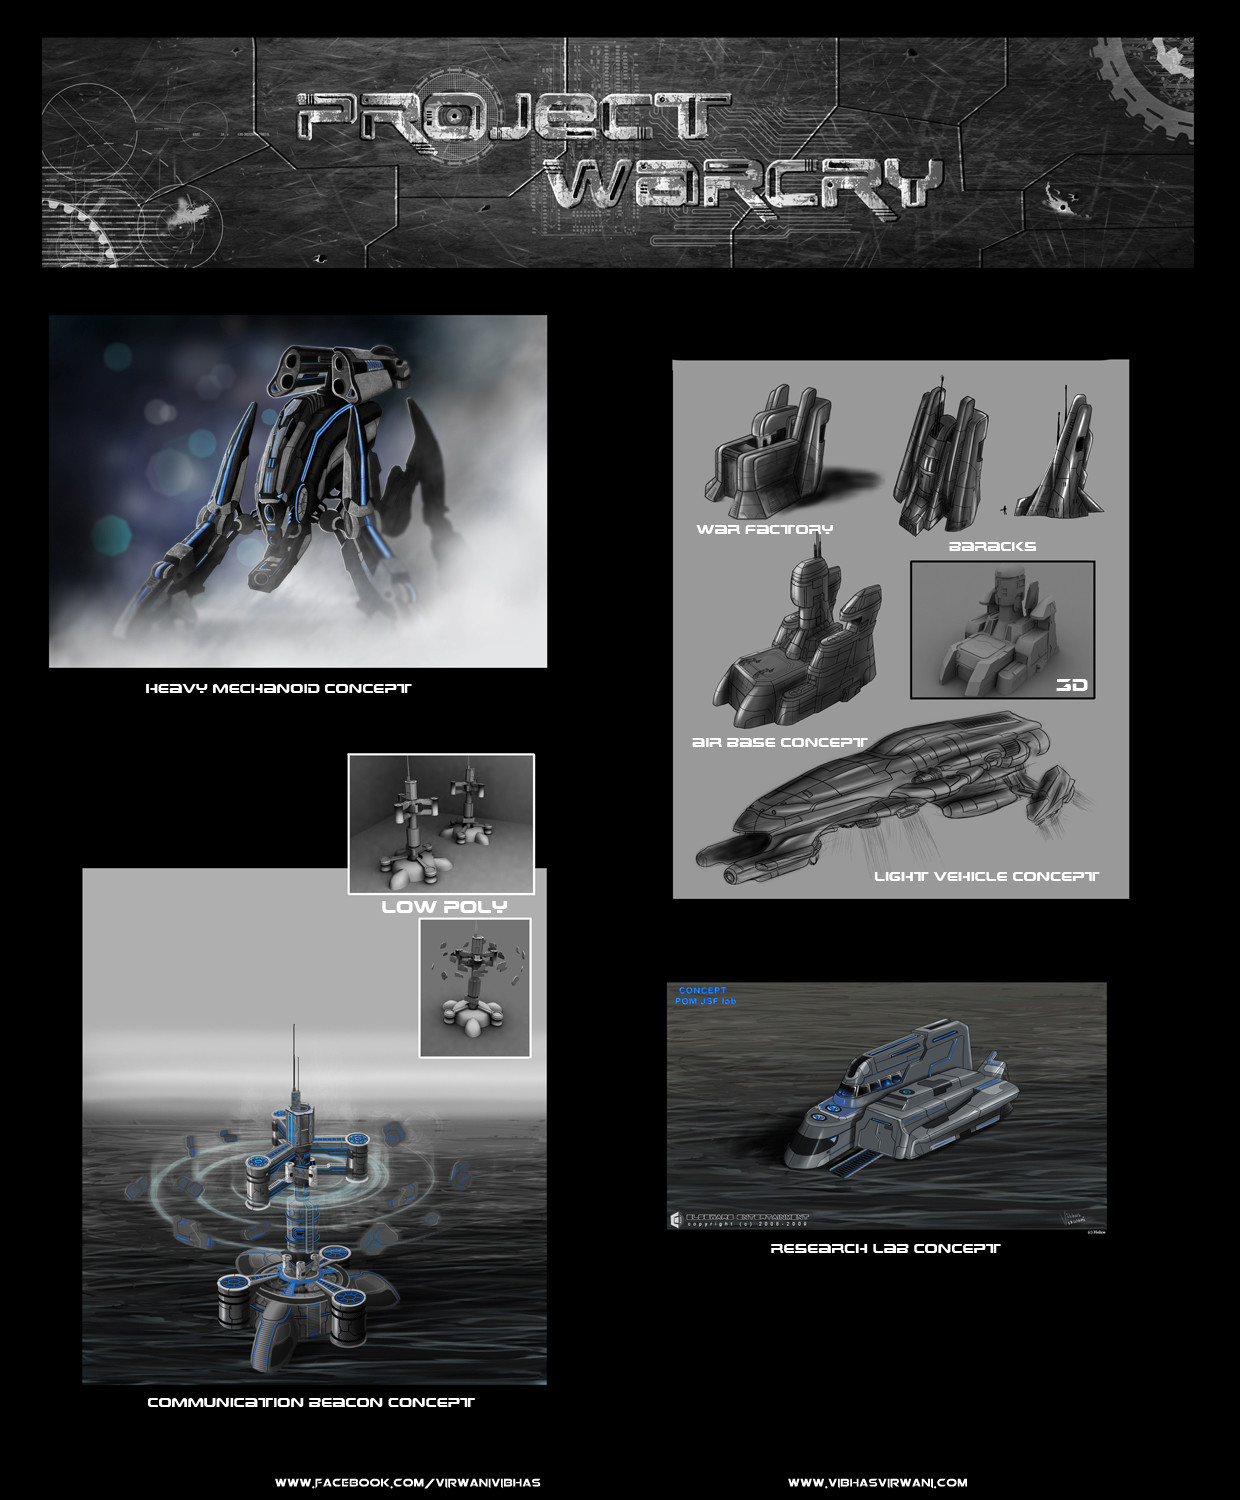 Some concept art done for project Warcry